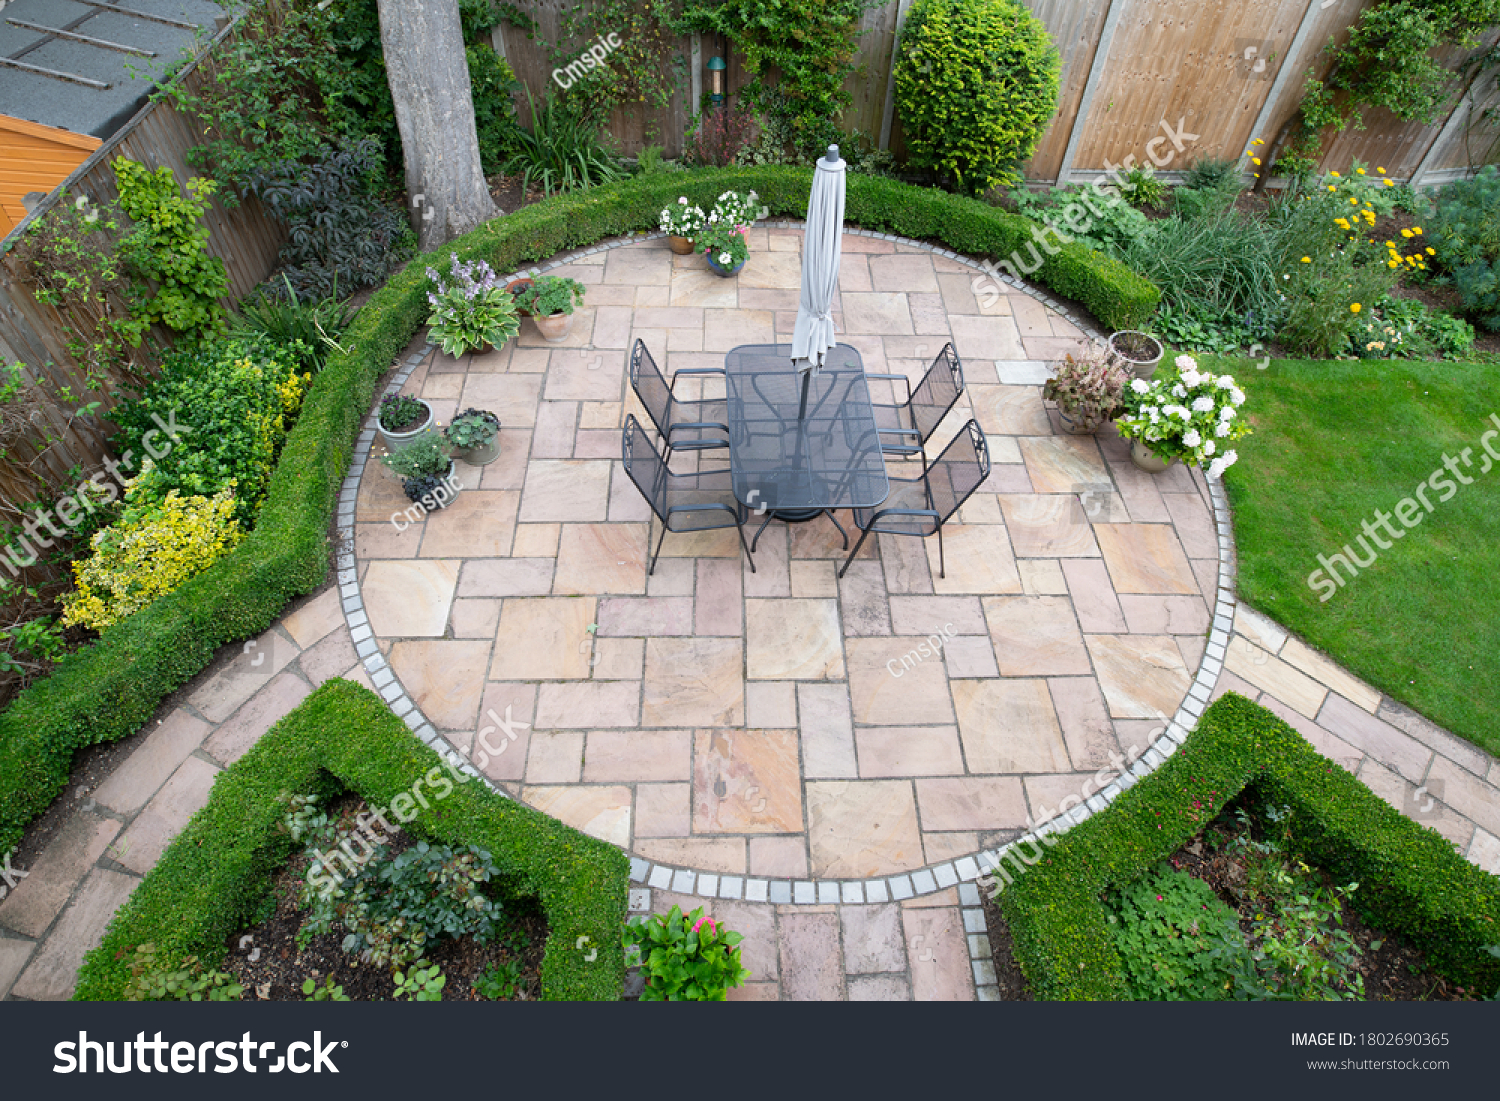 circular garden patio with freshly jet washed paving stones #1802690365